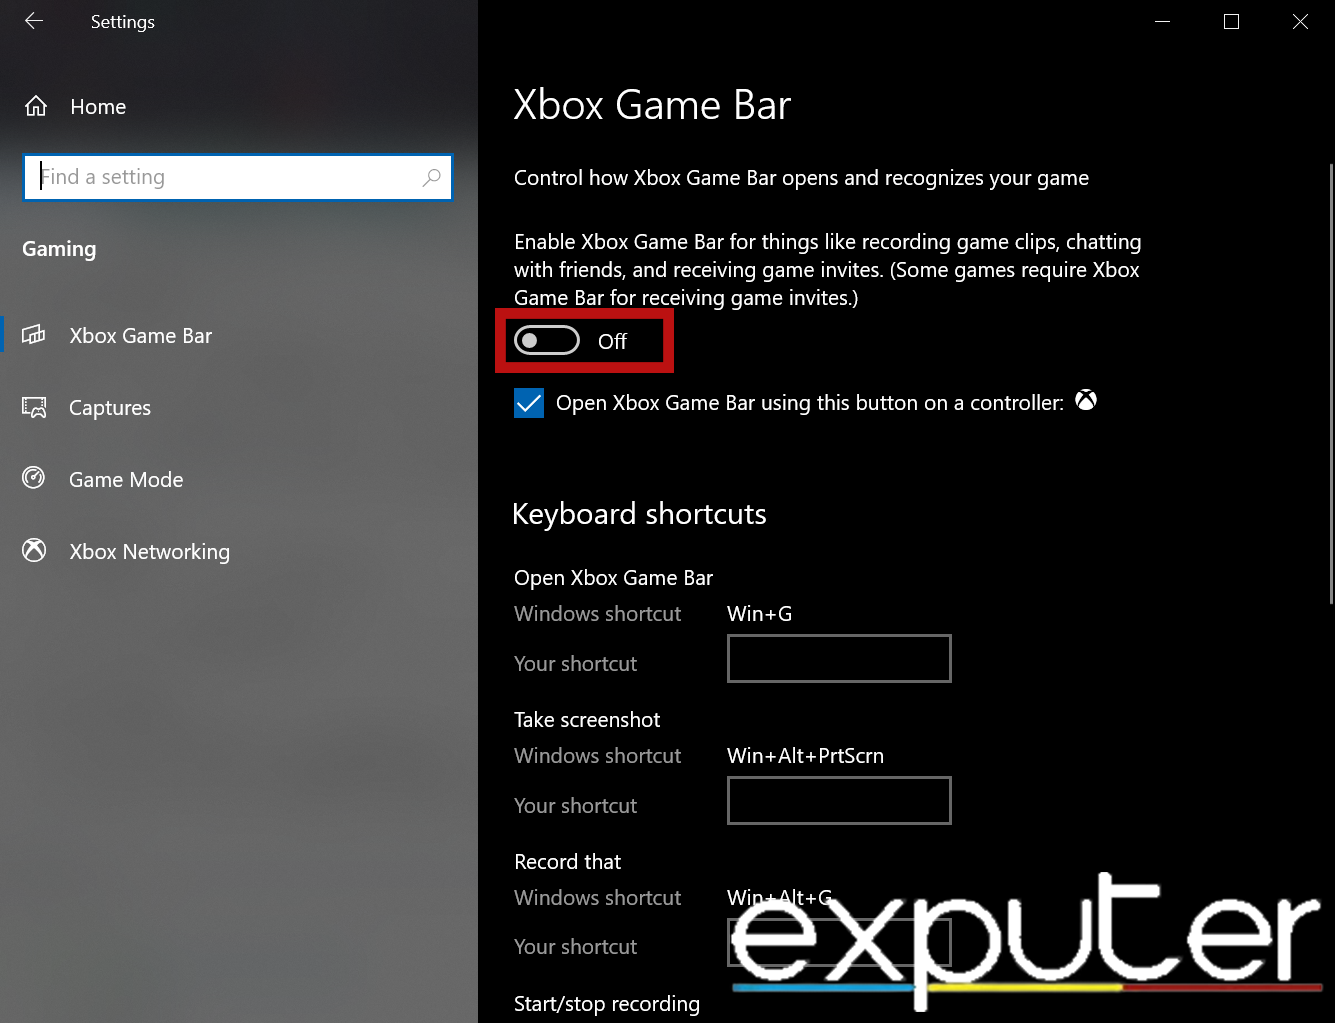 Disabling the Xbox Game bar. (image captured by eXputer)